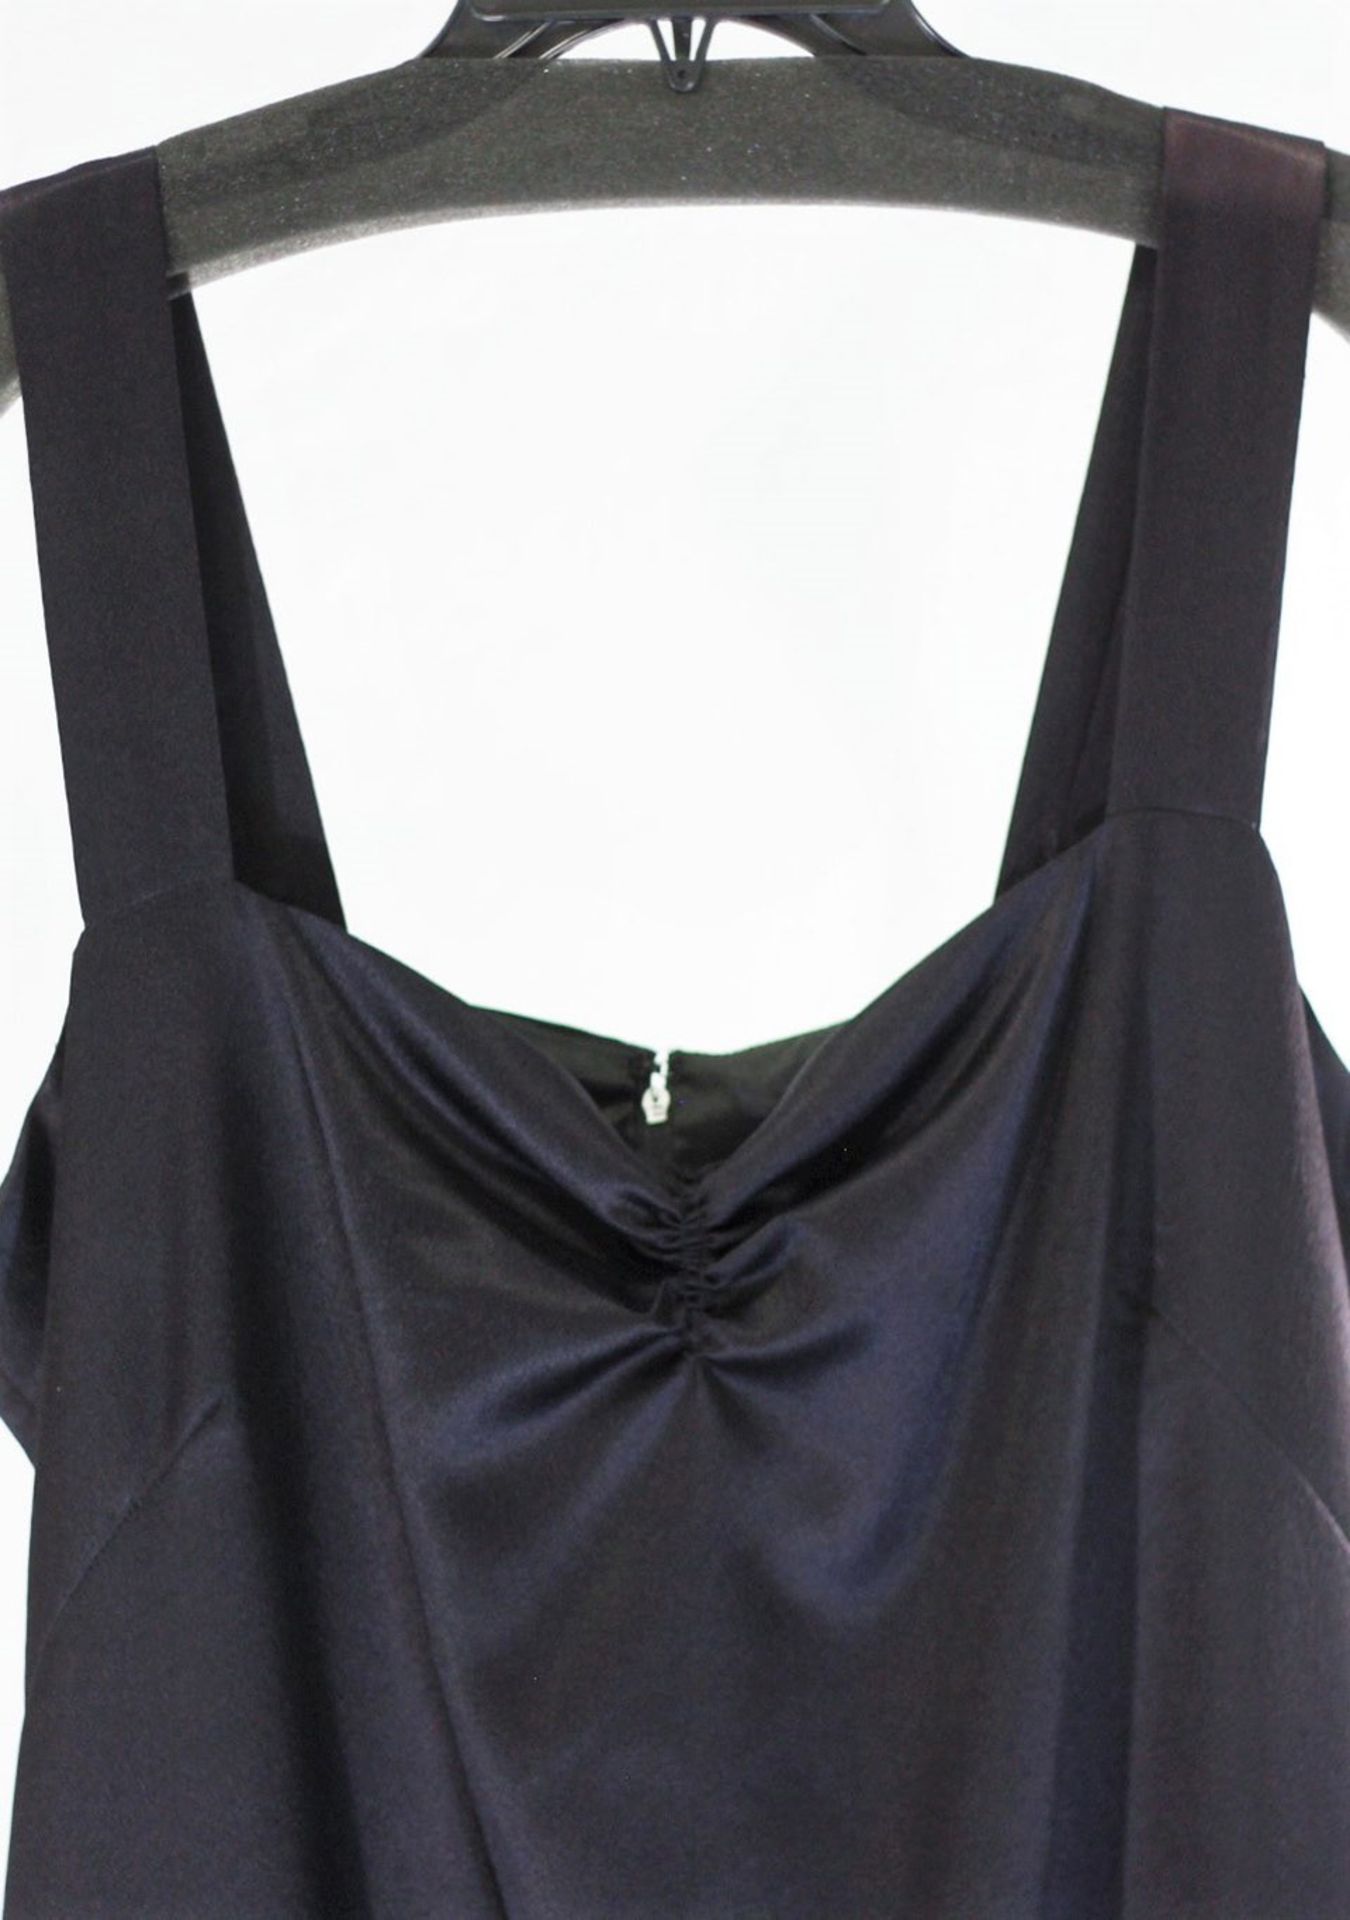 1 x Buetow Black Dress - Size: 20 - Material: 100% Viscose - From a High End Clothing Boutique In - Image 7 of 8